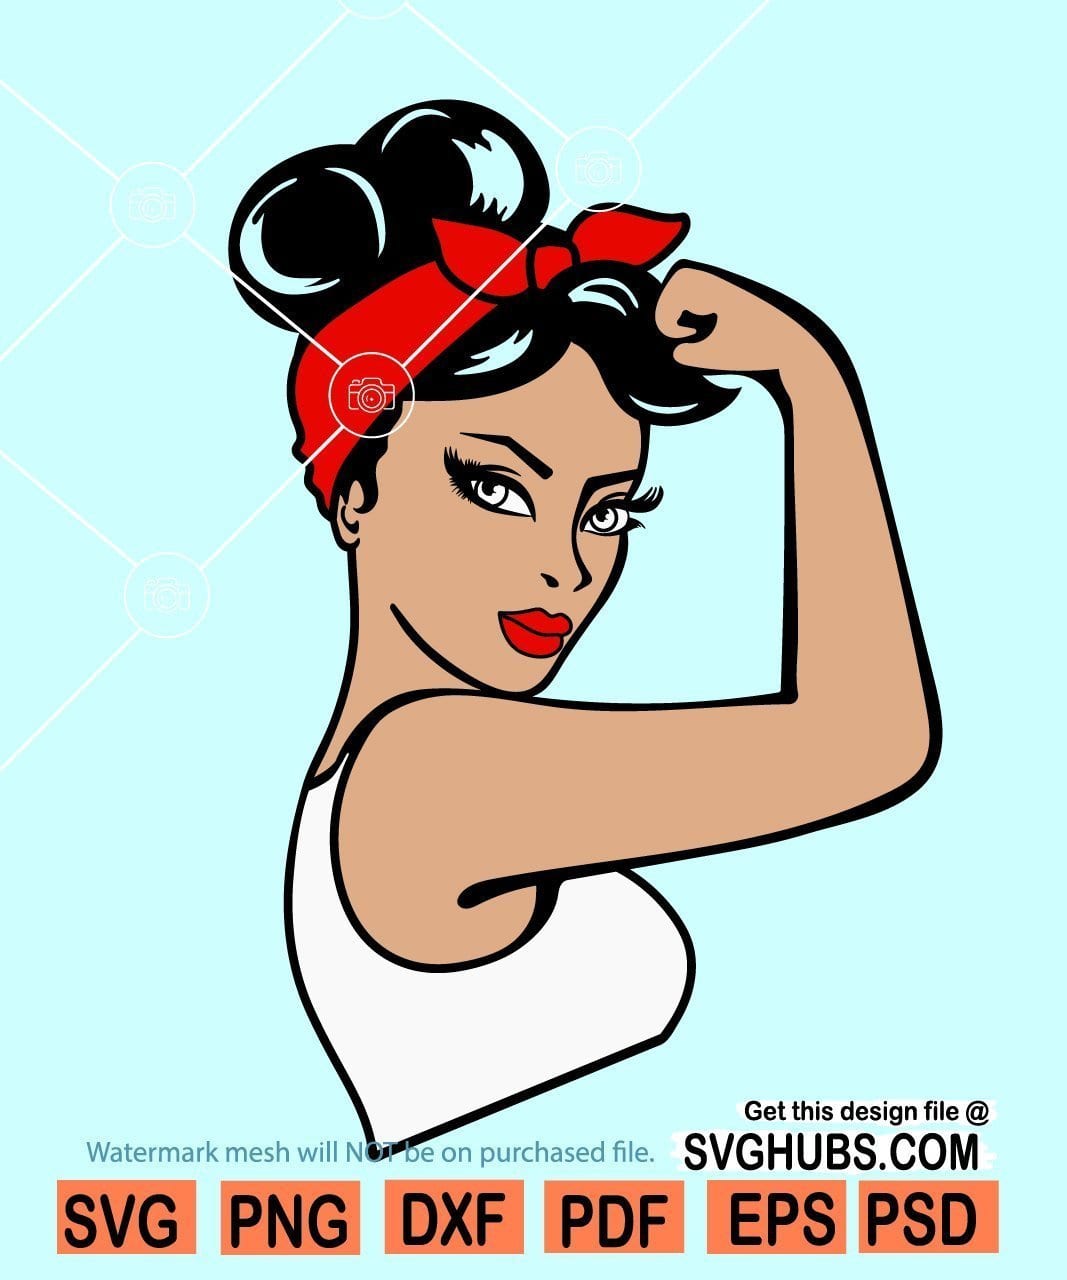 Afro rosie the riveter SVG.